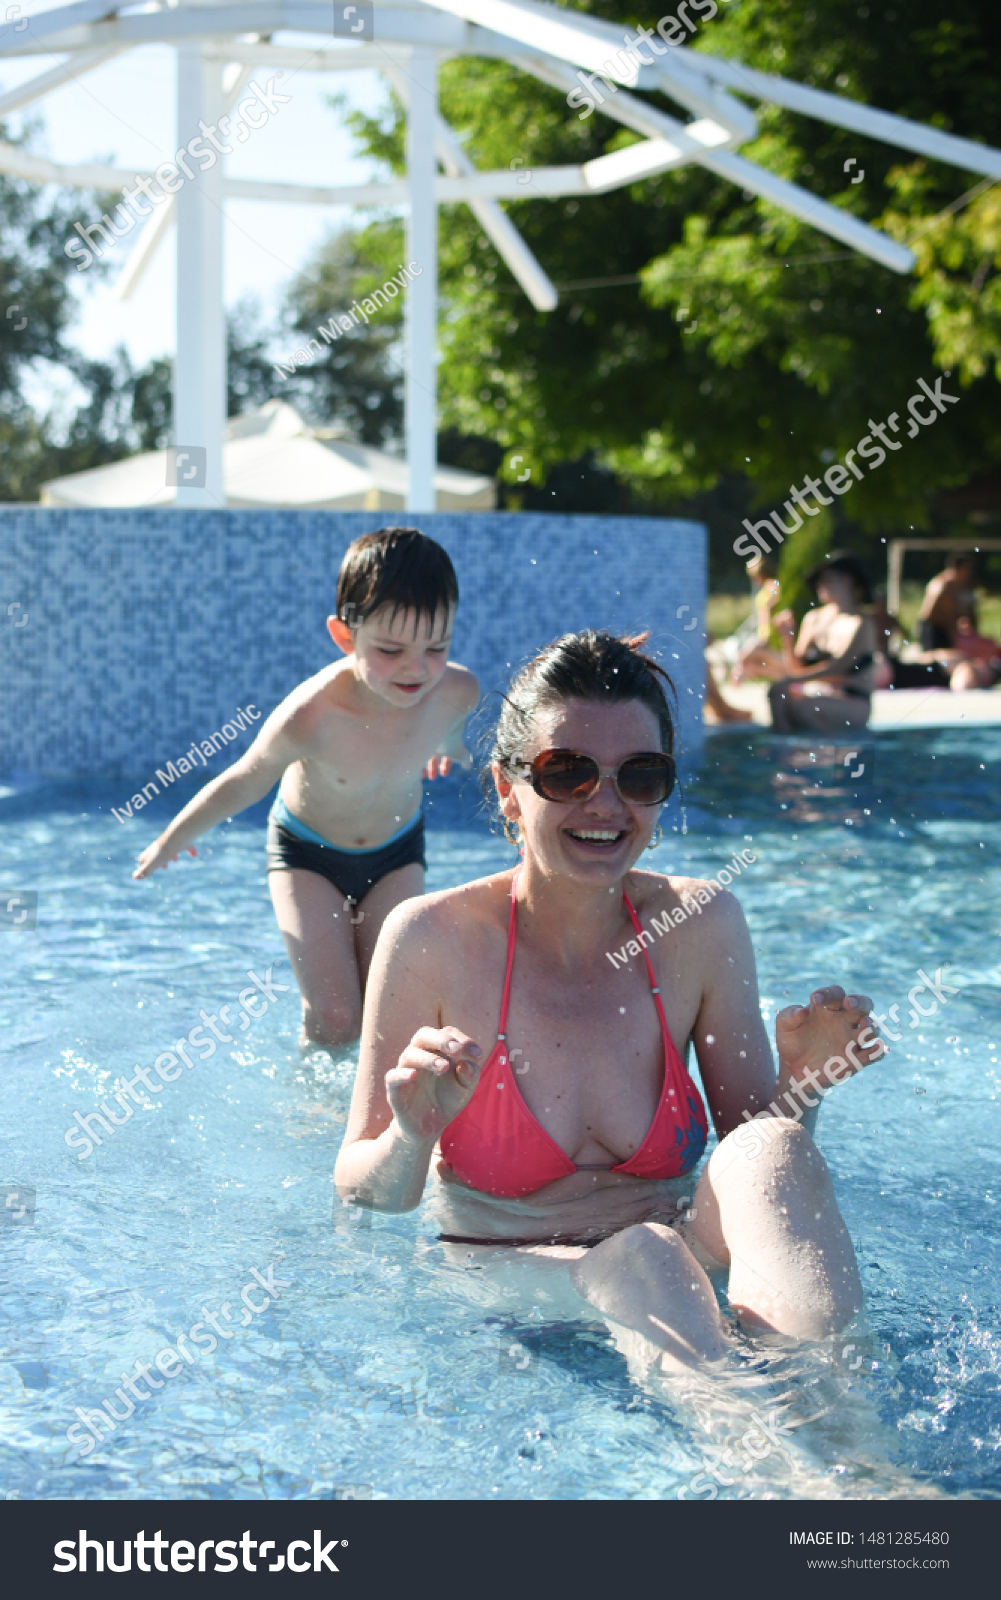 brooke mathers recommends hot moms at pool pic